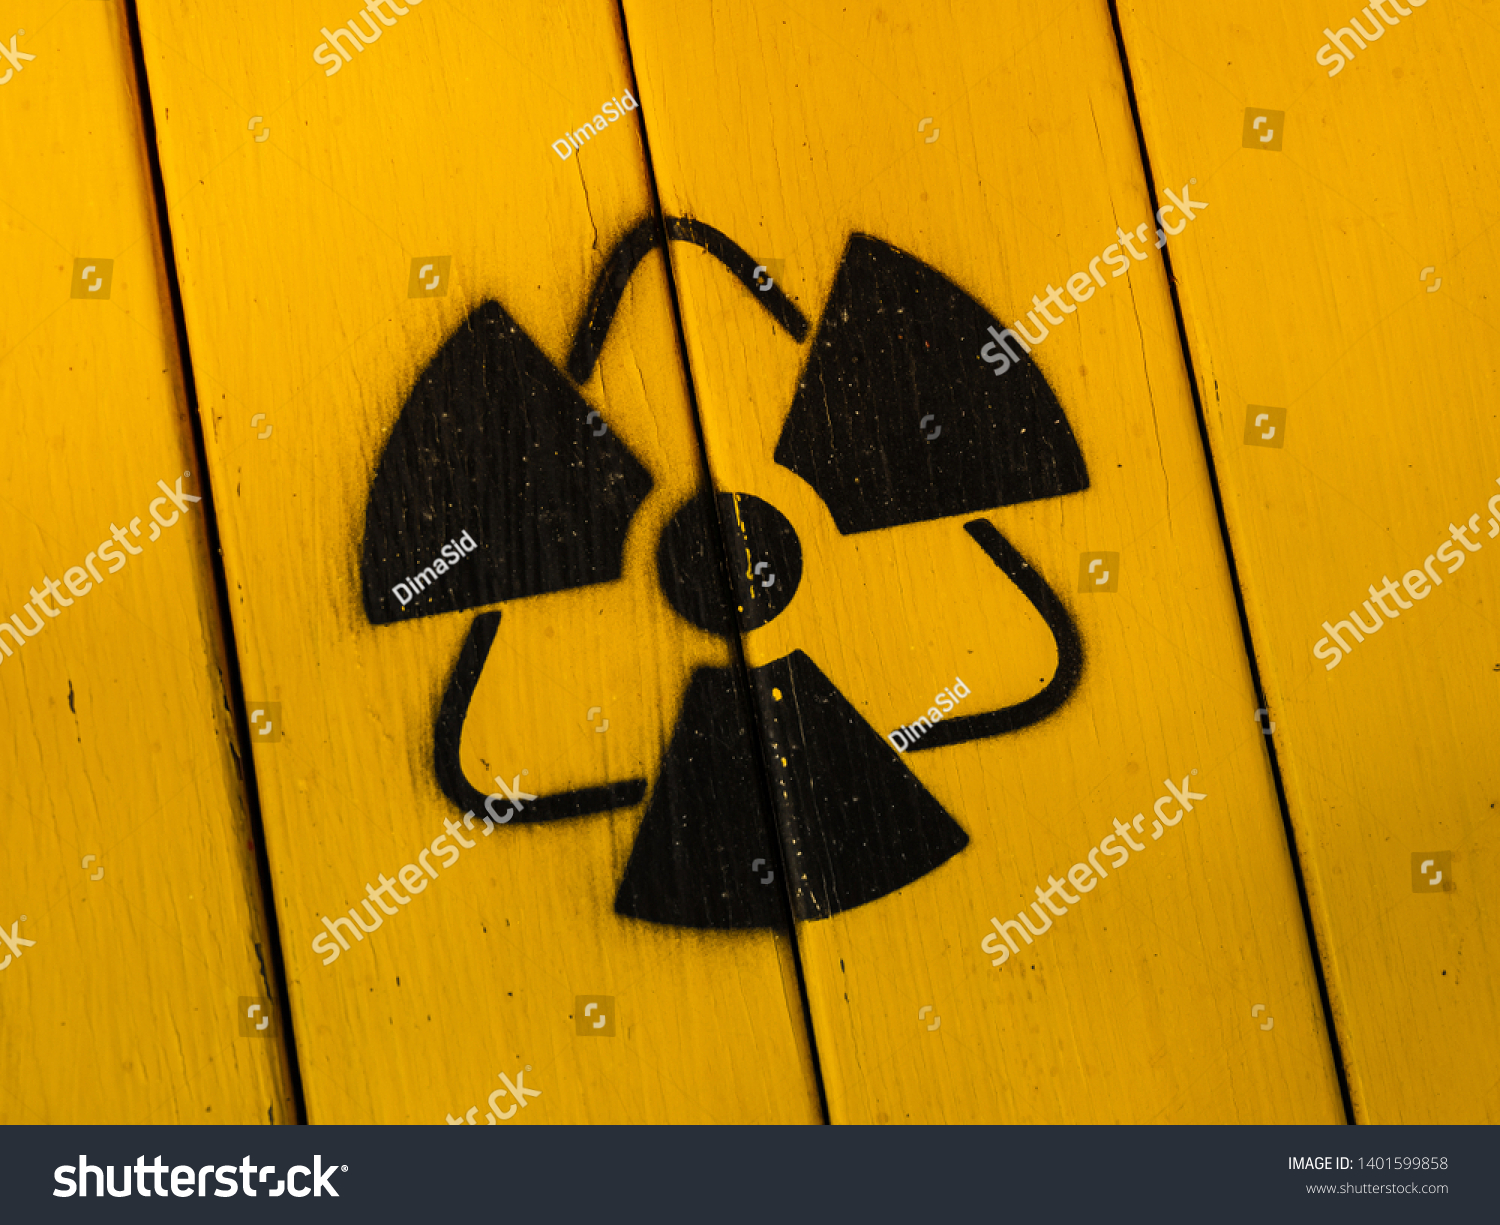 Radioactivity sign, close-up. Sign of radiation on a yellow wooden board. Radioactive sign - symbol of radiation. Yellow and black radioactive hazard, ionizing radiation, nuclear danger warning symbol #1401599858